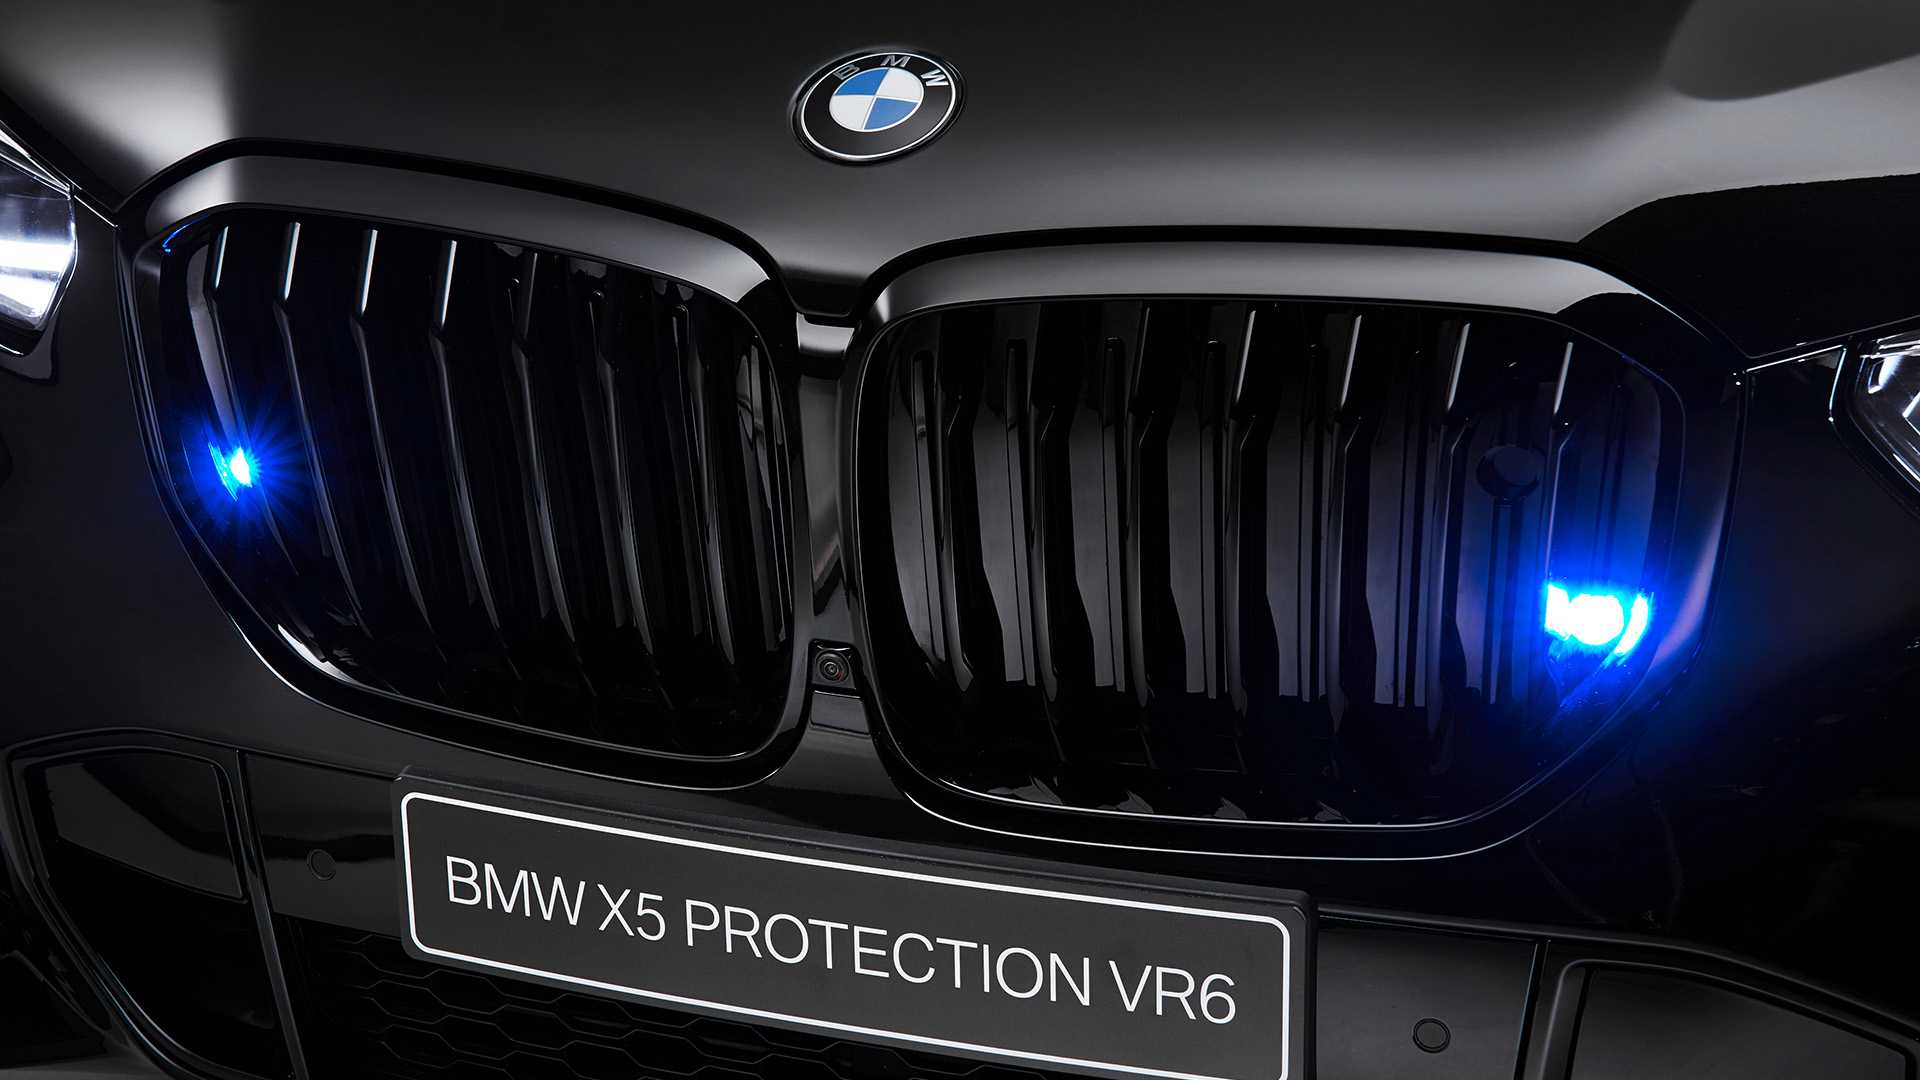 2020 BMW X5 Protection VR6 (Armored Vehicle) Grill Wallpapers #22 of 25